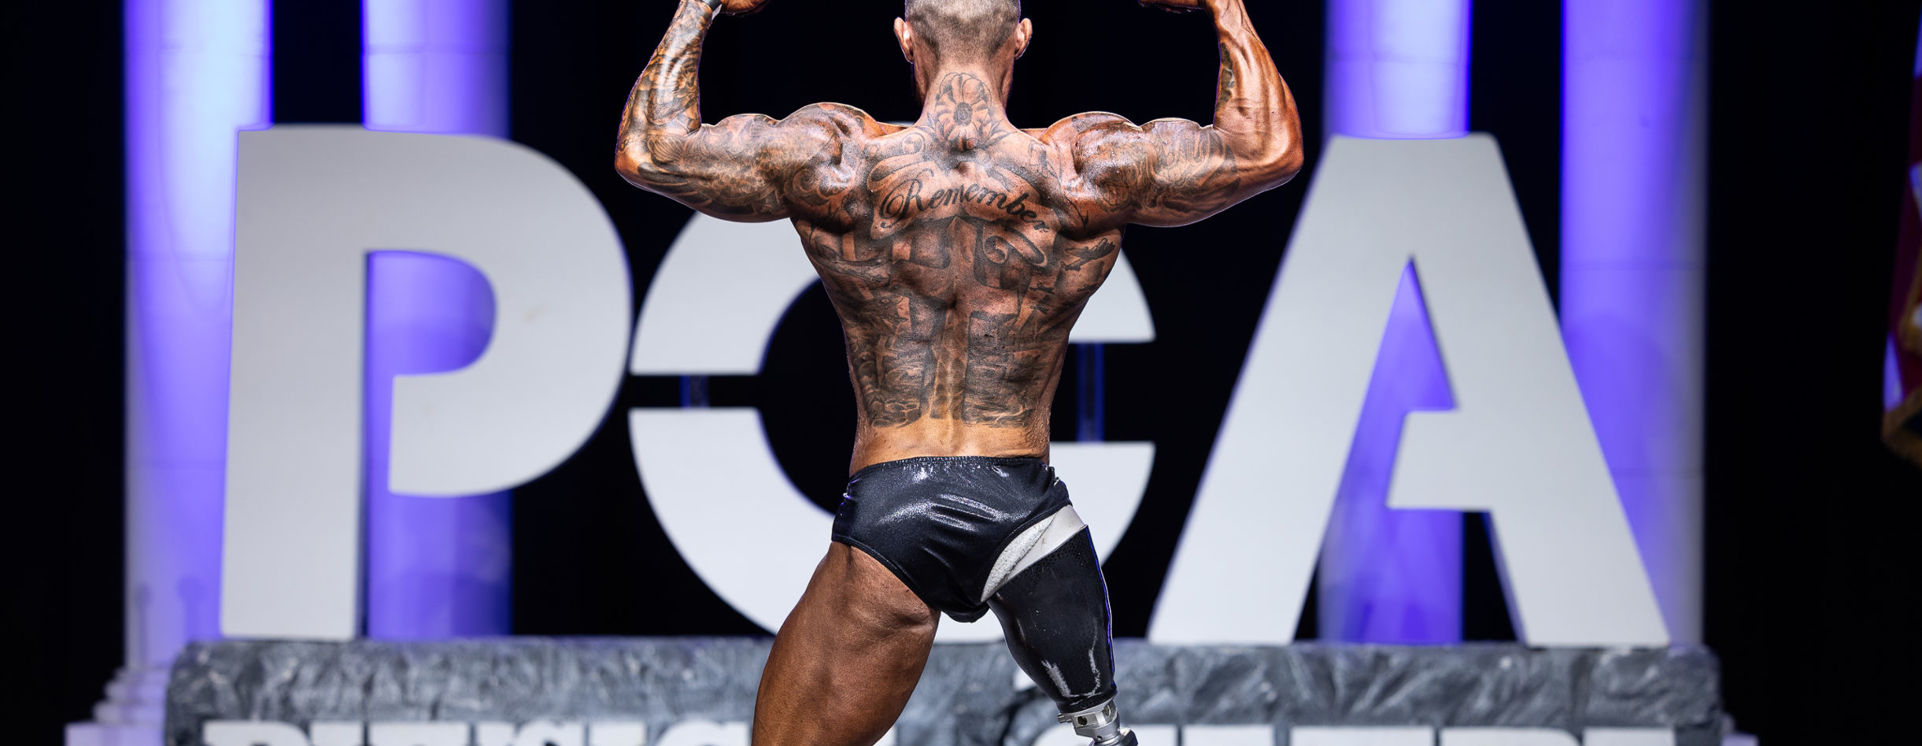 A male bodybuilder poses on stage with his back to the camera, flexing his arms in a double biceps pose.